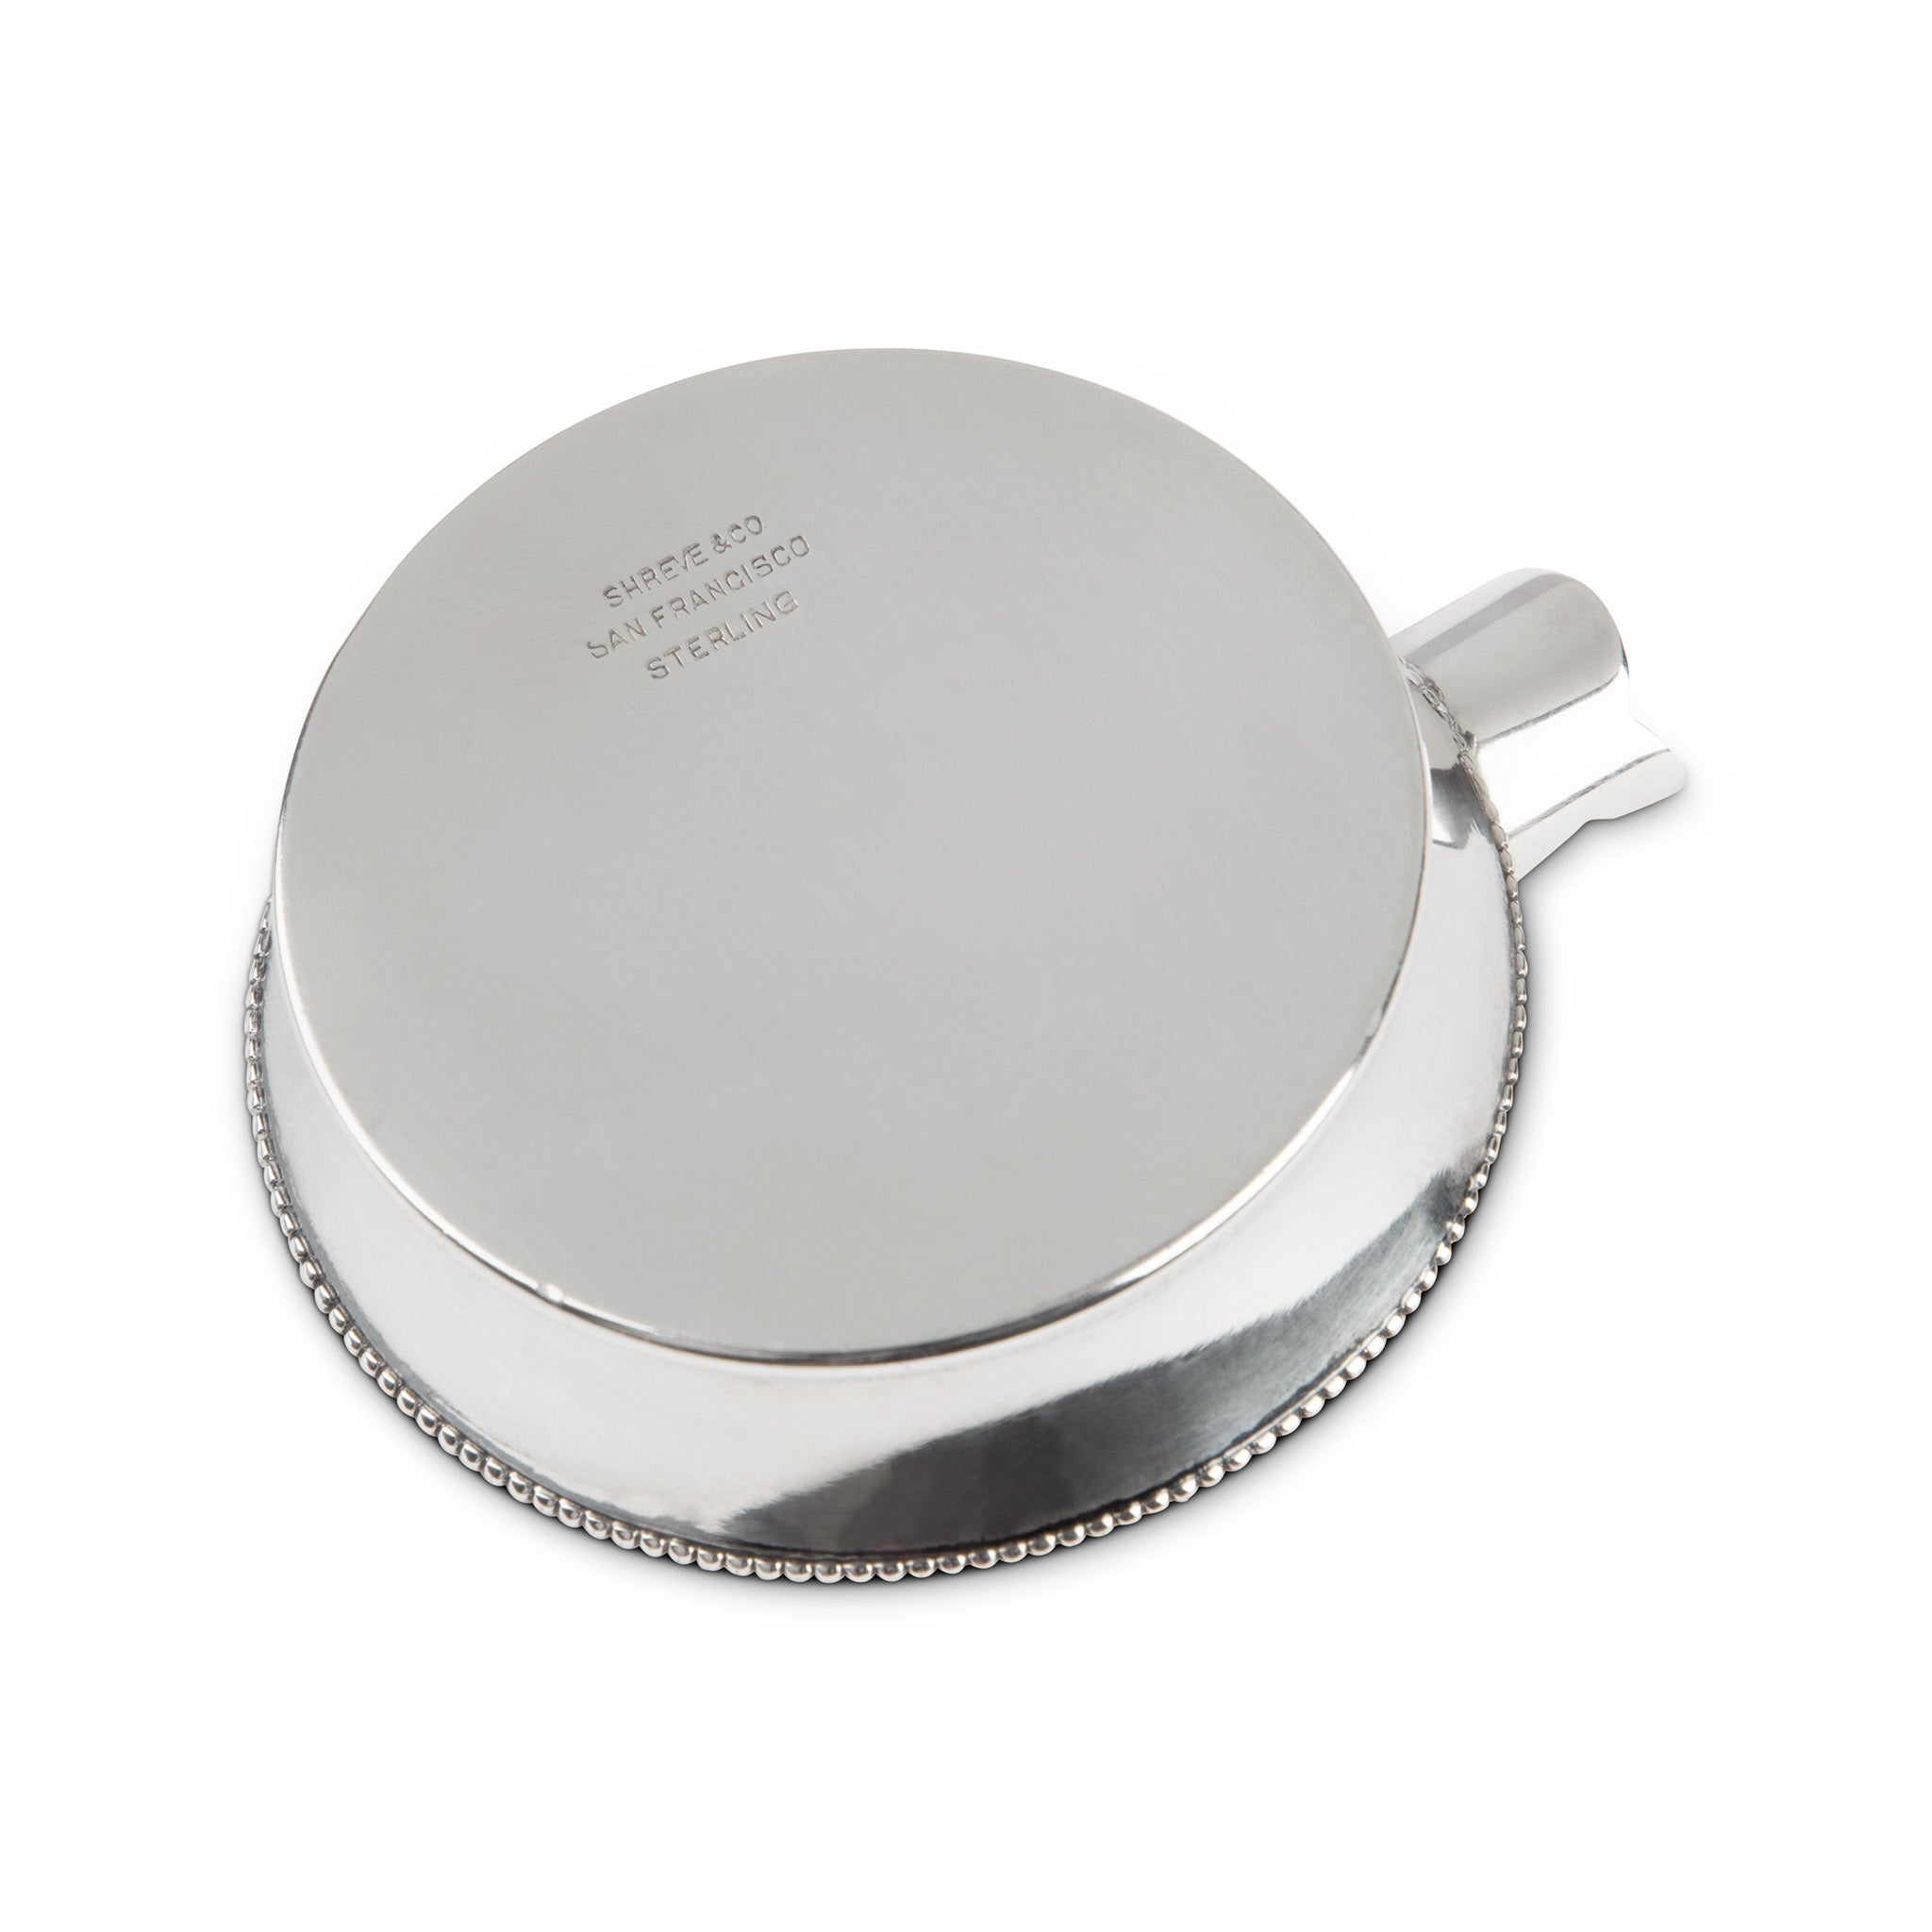 Shreve & Co Sterling Silver Personal Ashtray